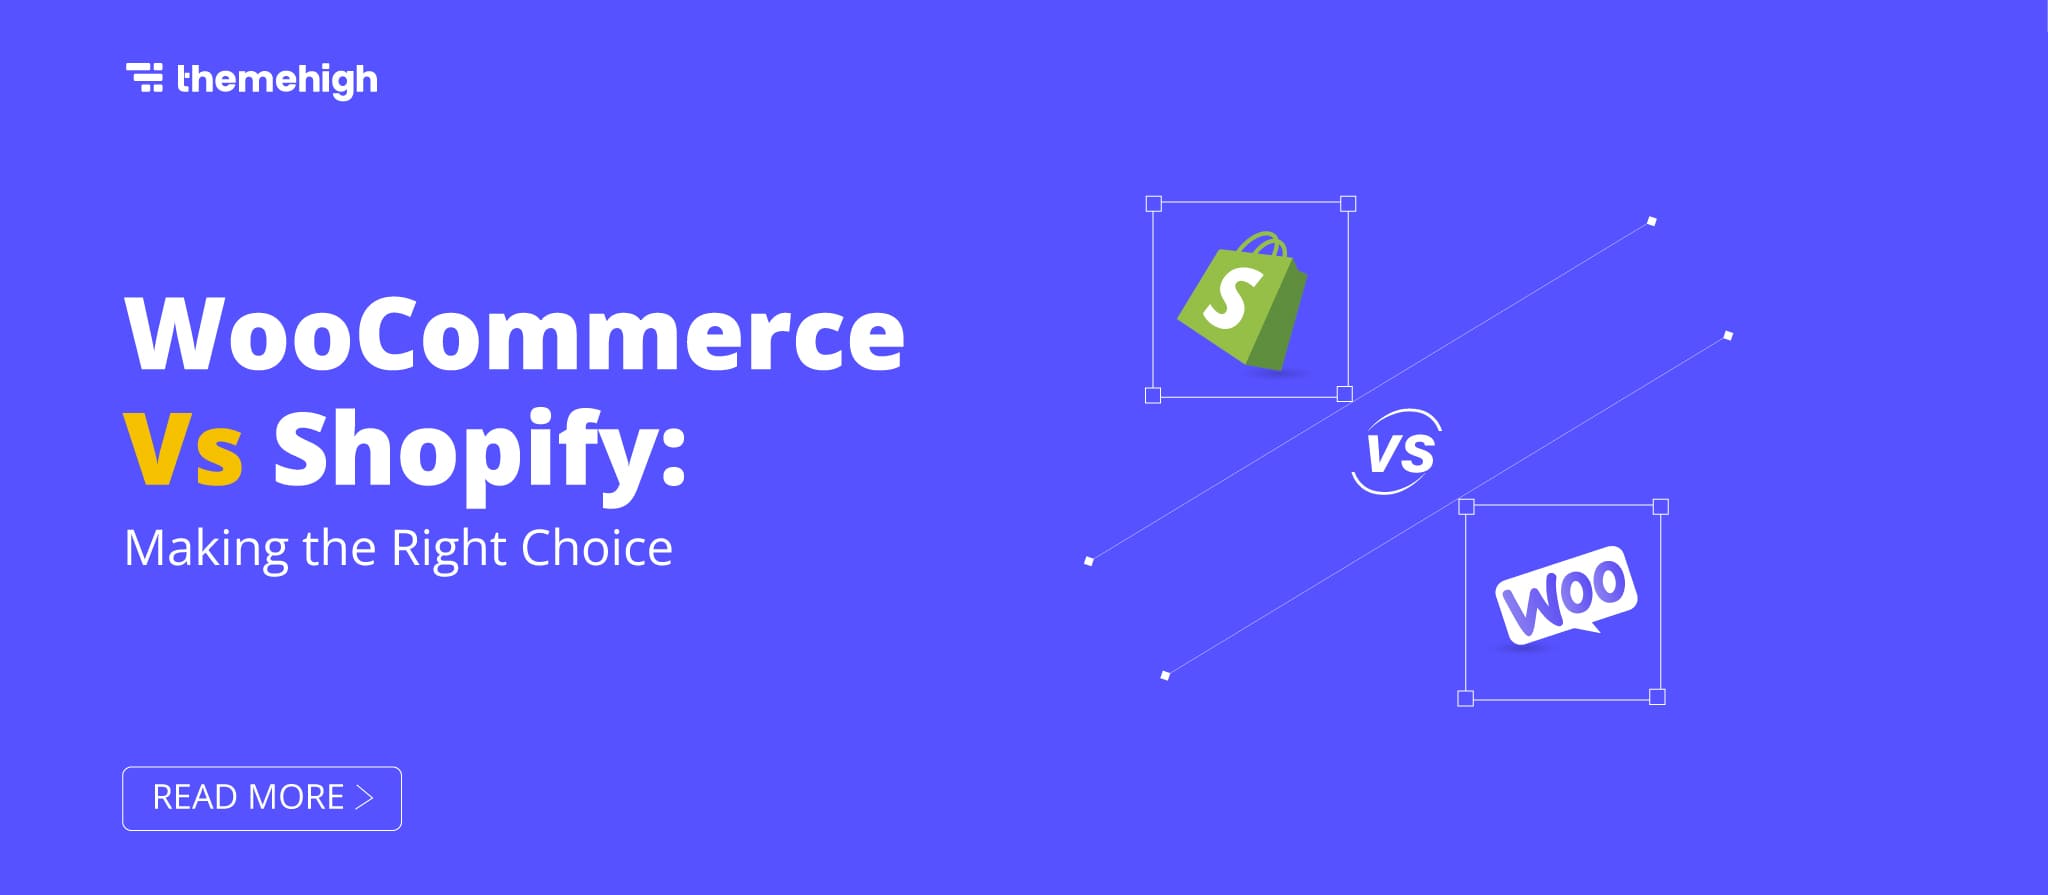 Feature image of WooCommerce v Shopify